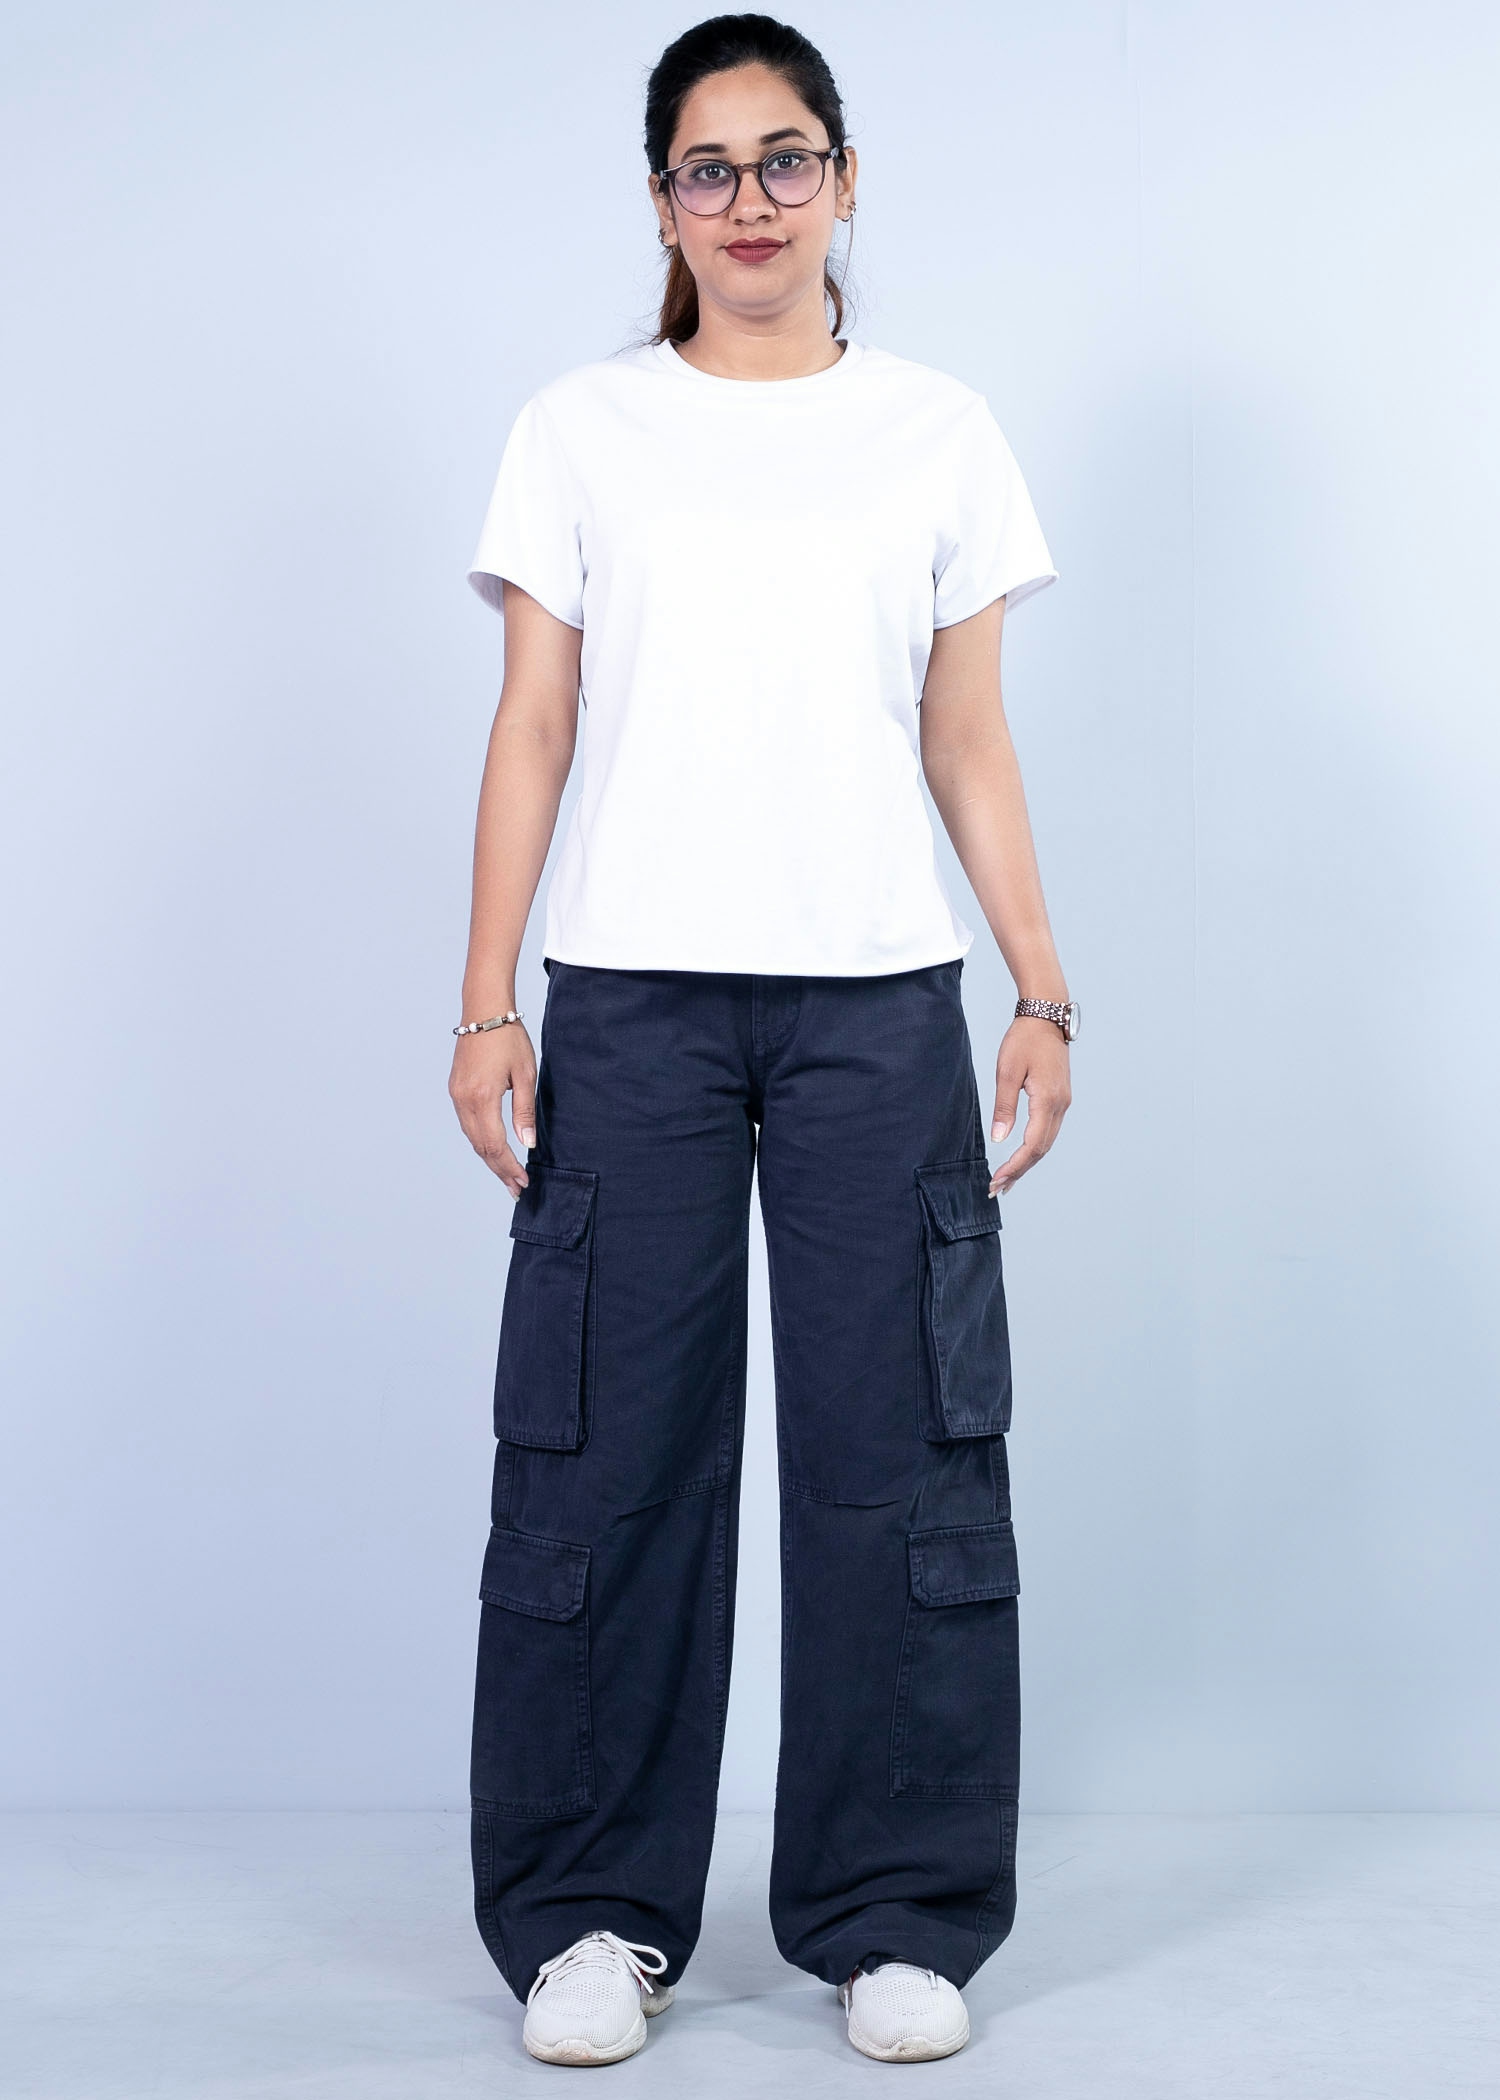 abutilon i cargo pant navy color full front view